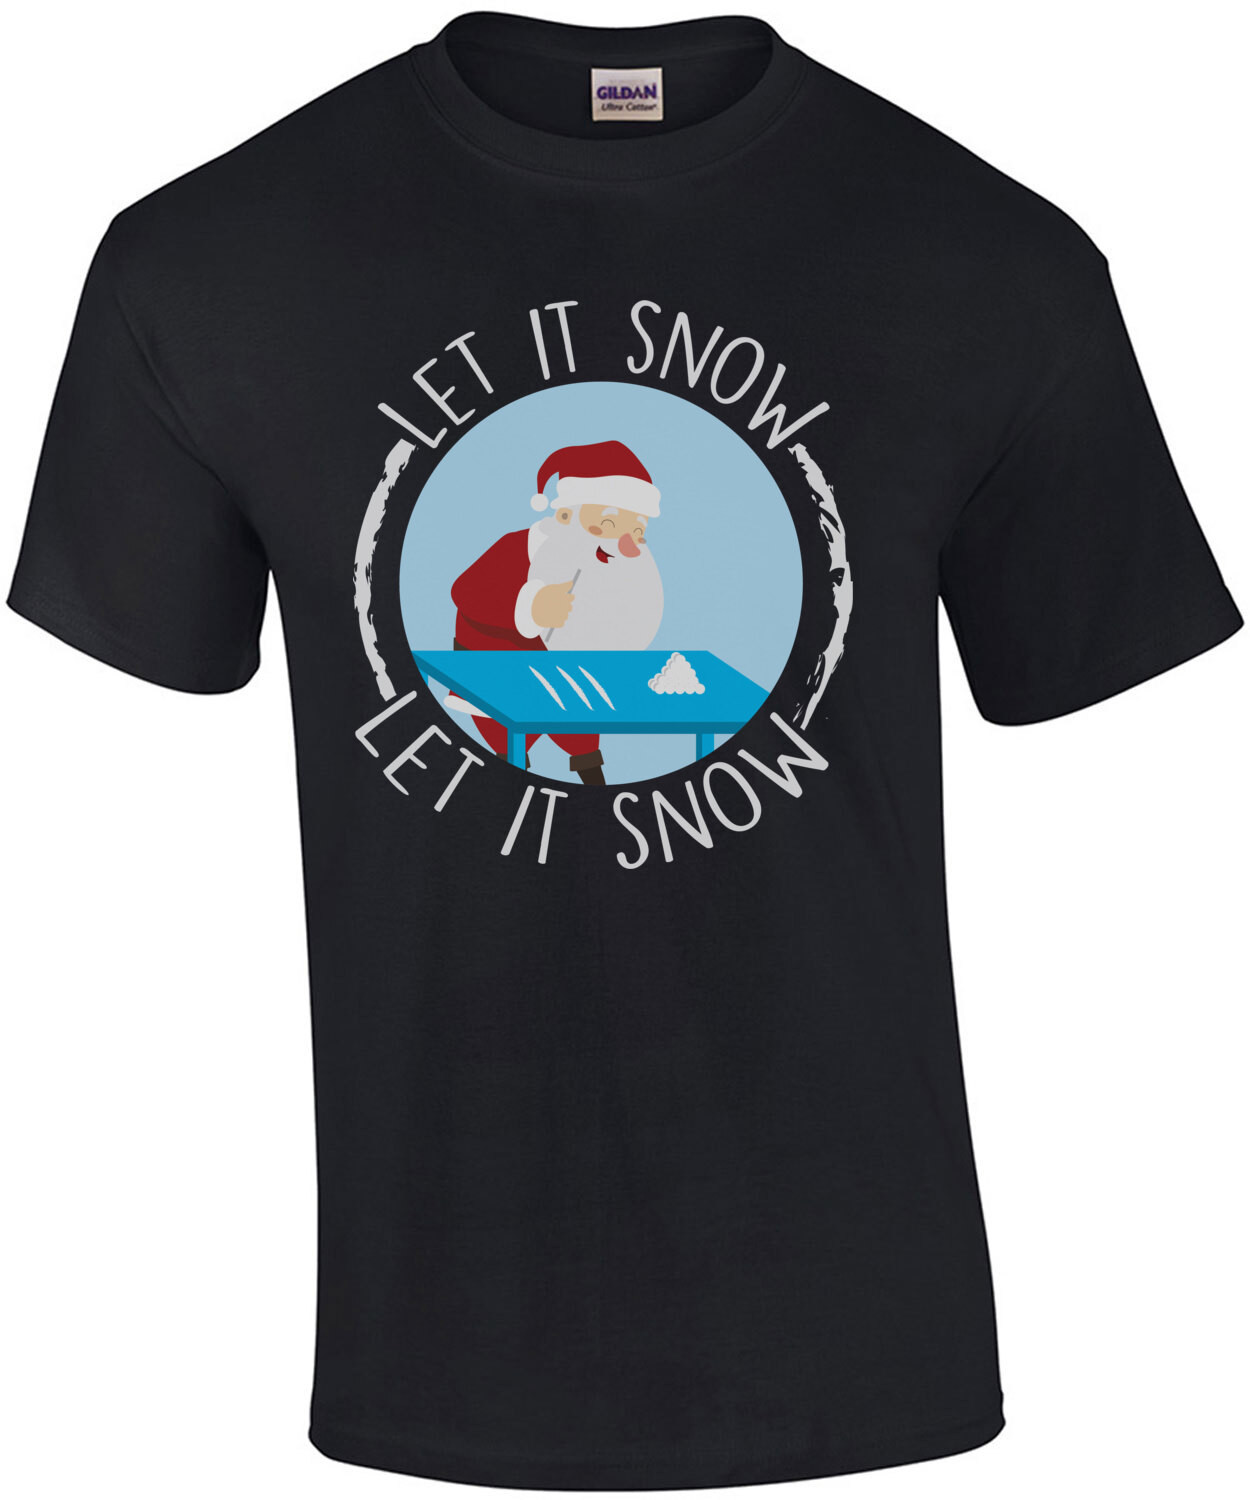 Let it snow - Santa Cocaine - Banned by Walmart - Christmas T-Shirt